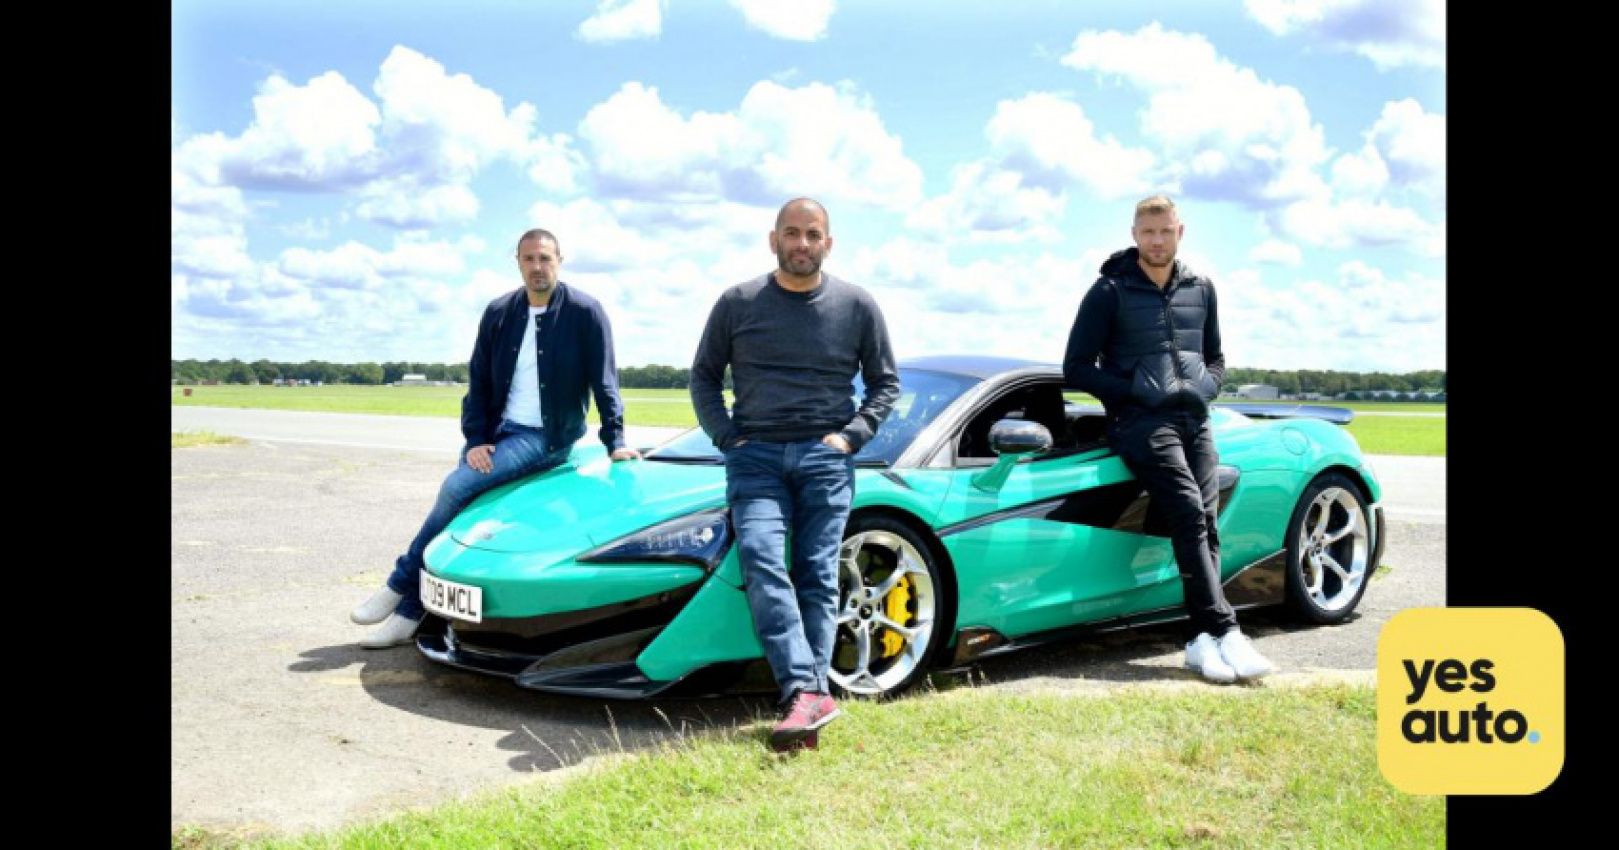 audi, autos, cars, car news, top gear shows off socially distanced audience while filming for new series